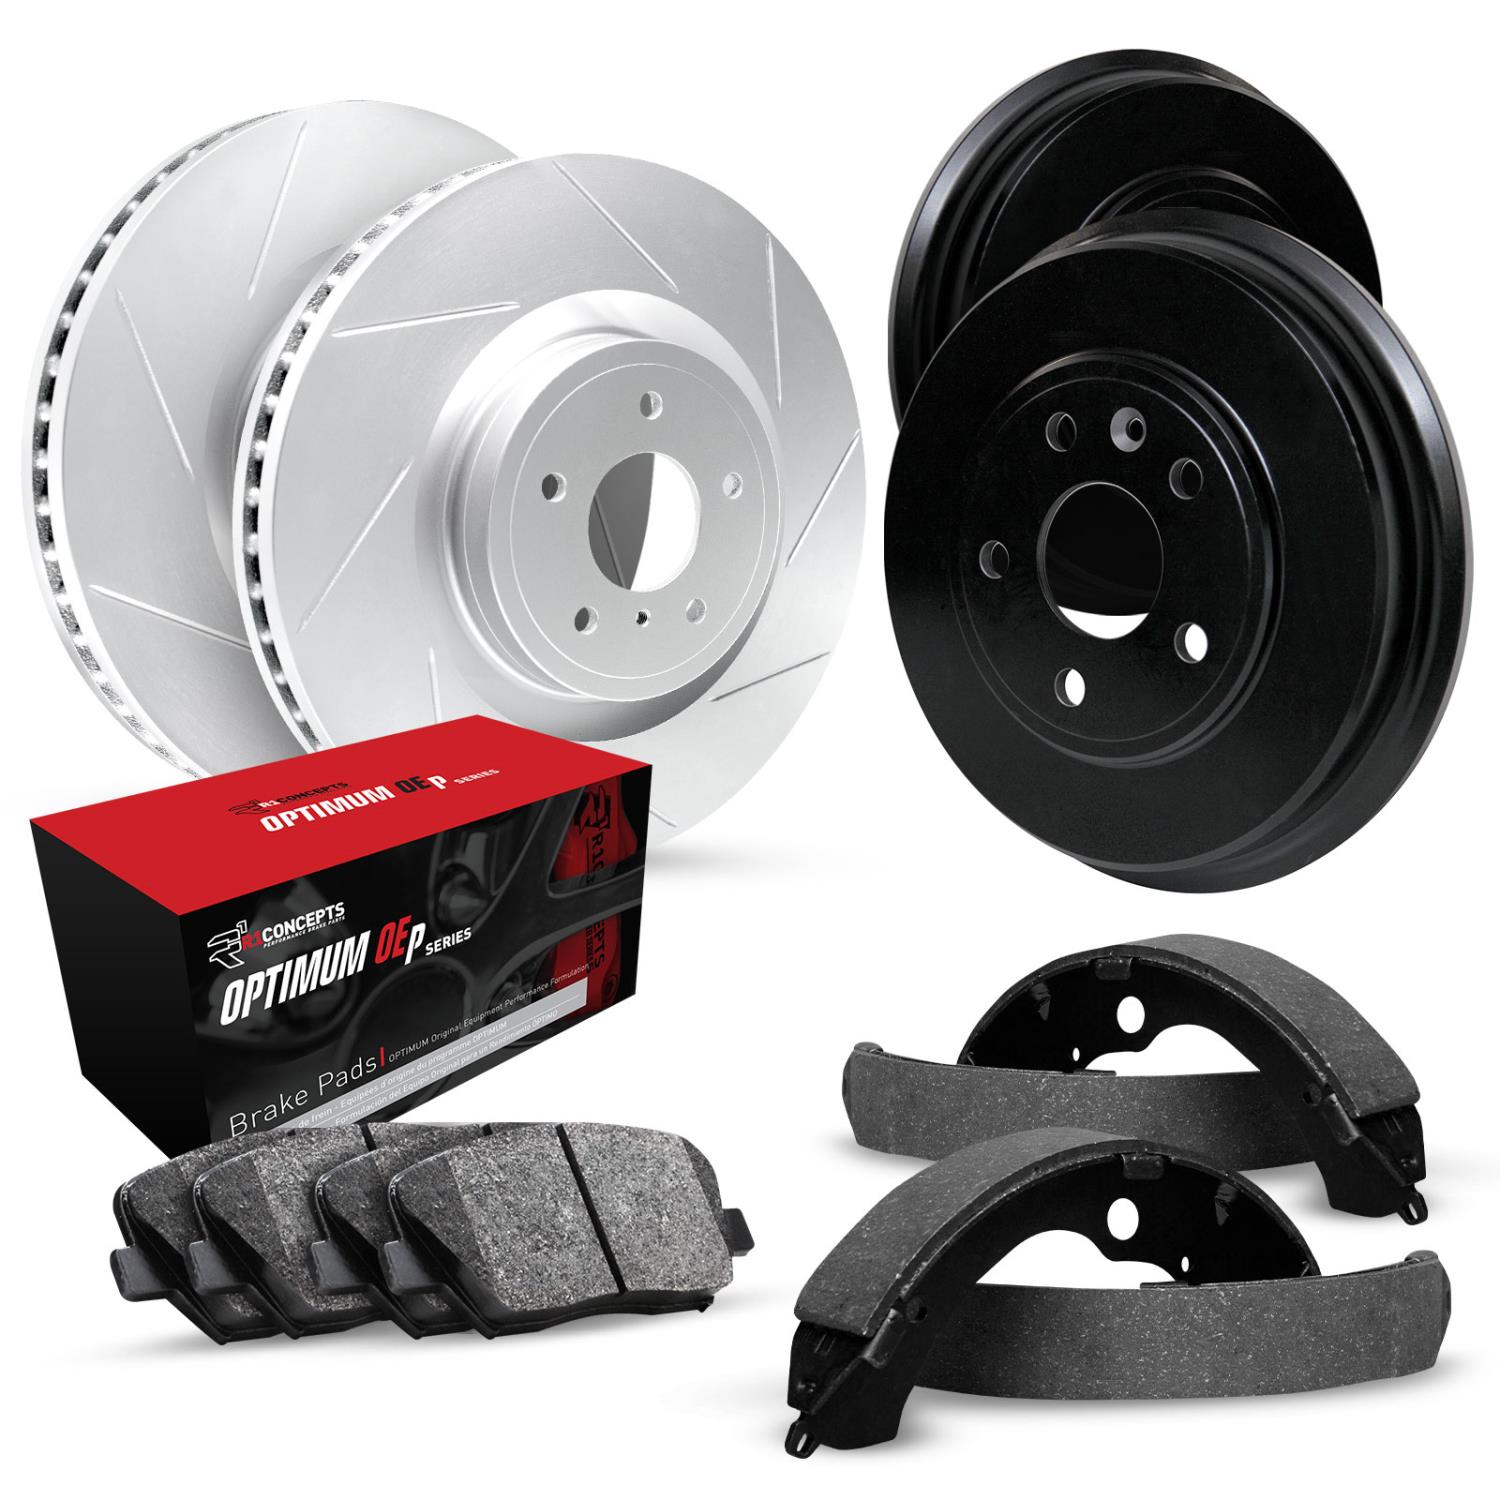 GEO-Carbon Slotted Brake Rotor & Drum Set w/Optimum OE Pads & Shoes, 2000-2001 Subaru, Position: Front & Rear